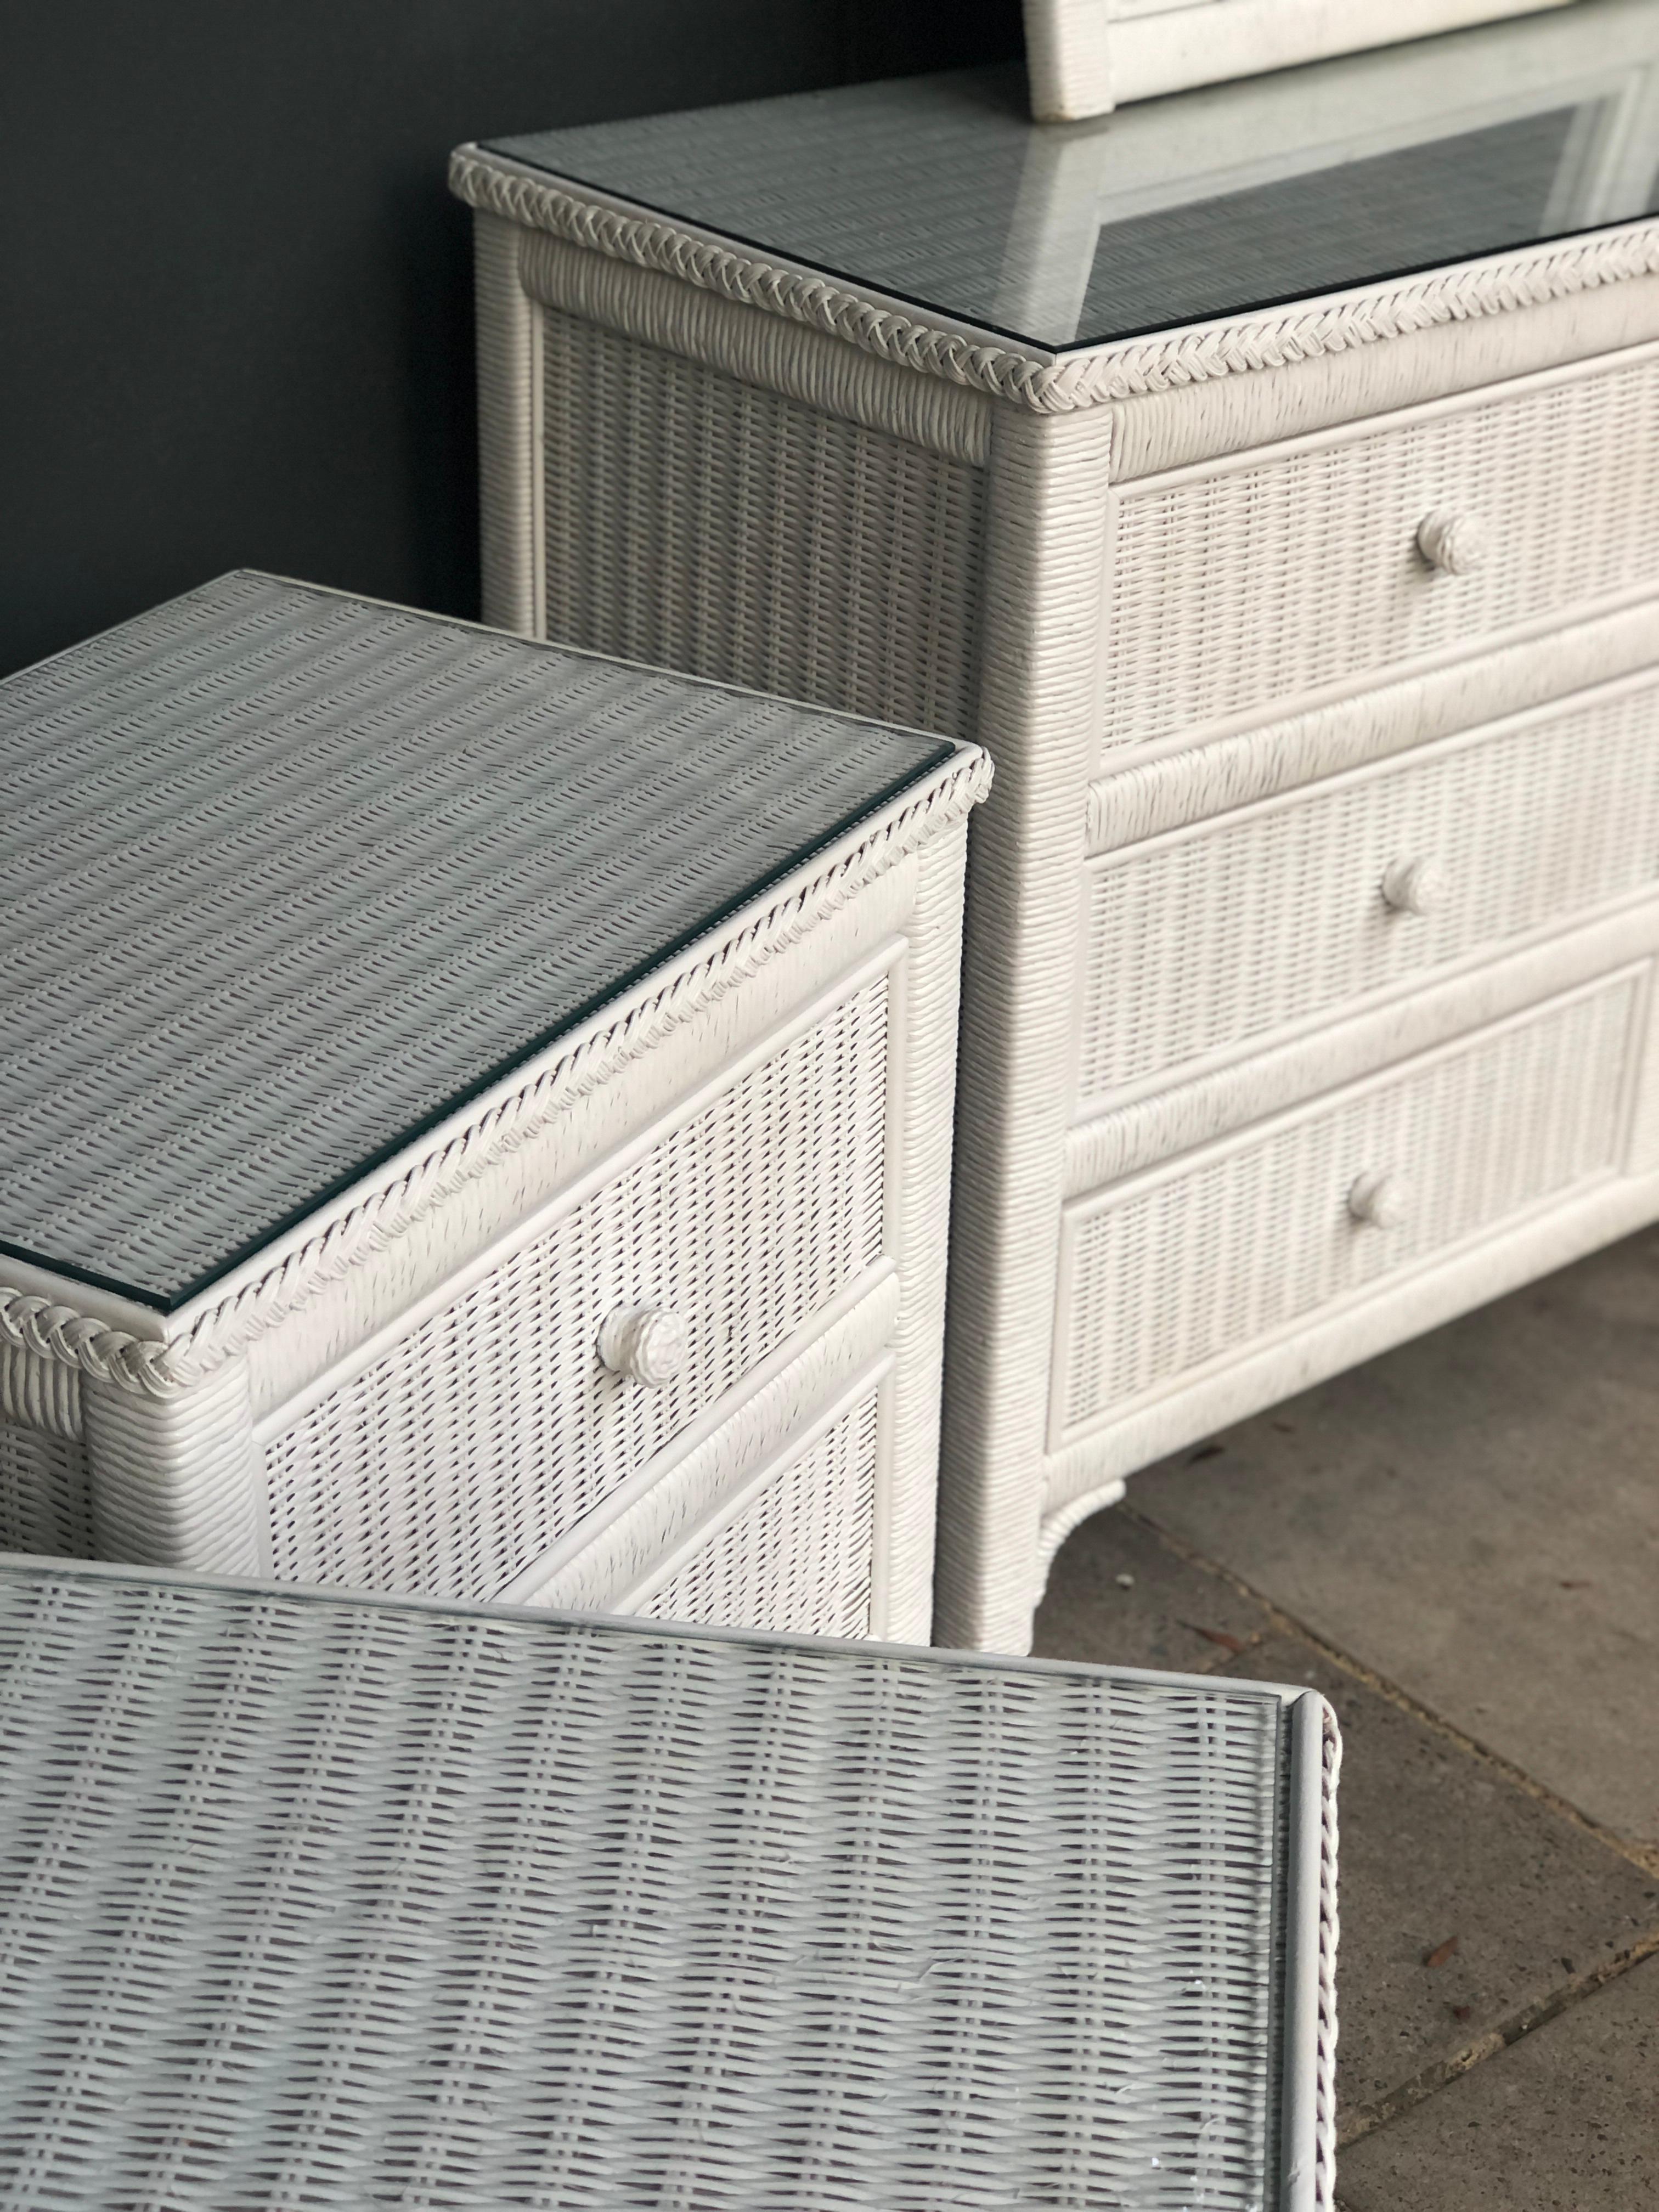 Late 20th Century Henry Link Set of White Wicker Bedroom Furniture, Nightstands, Mirror 1980s For Sale